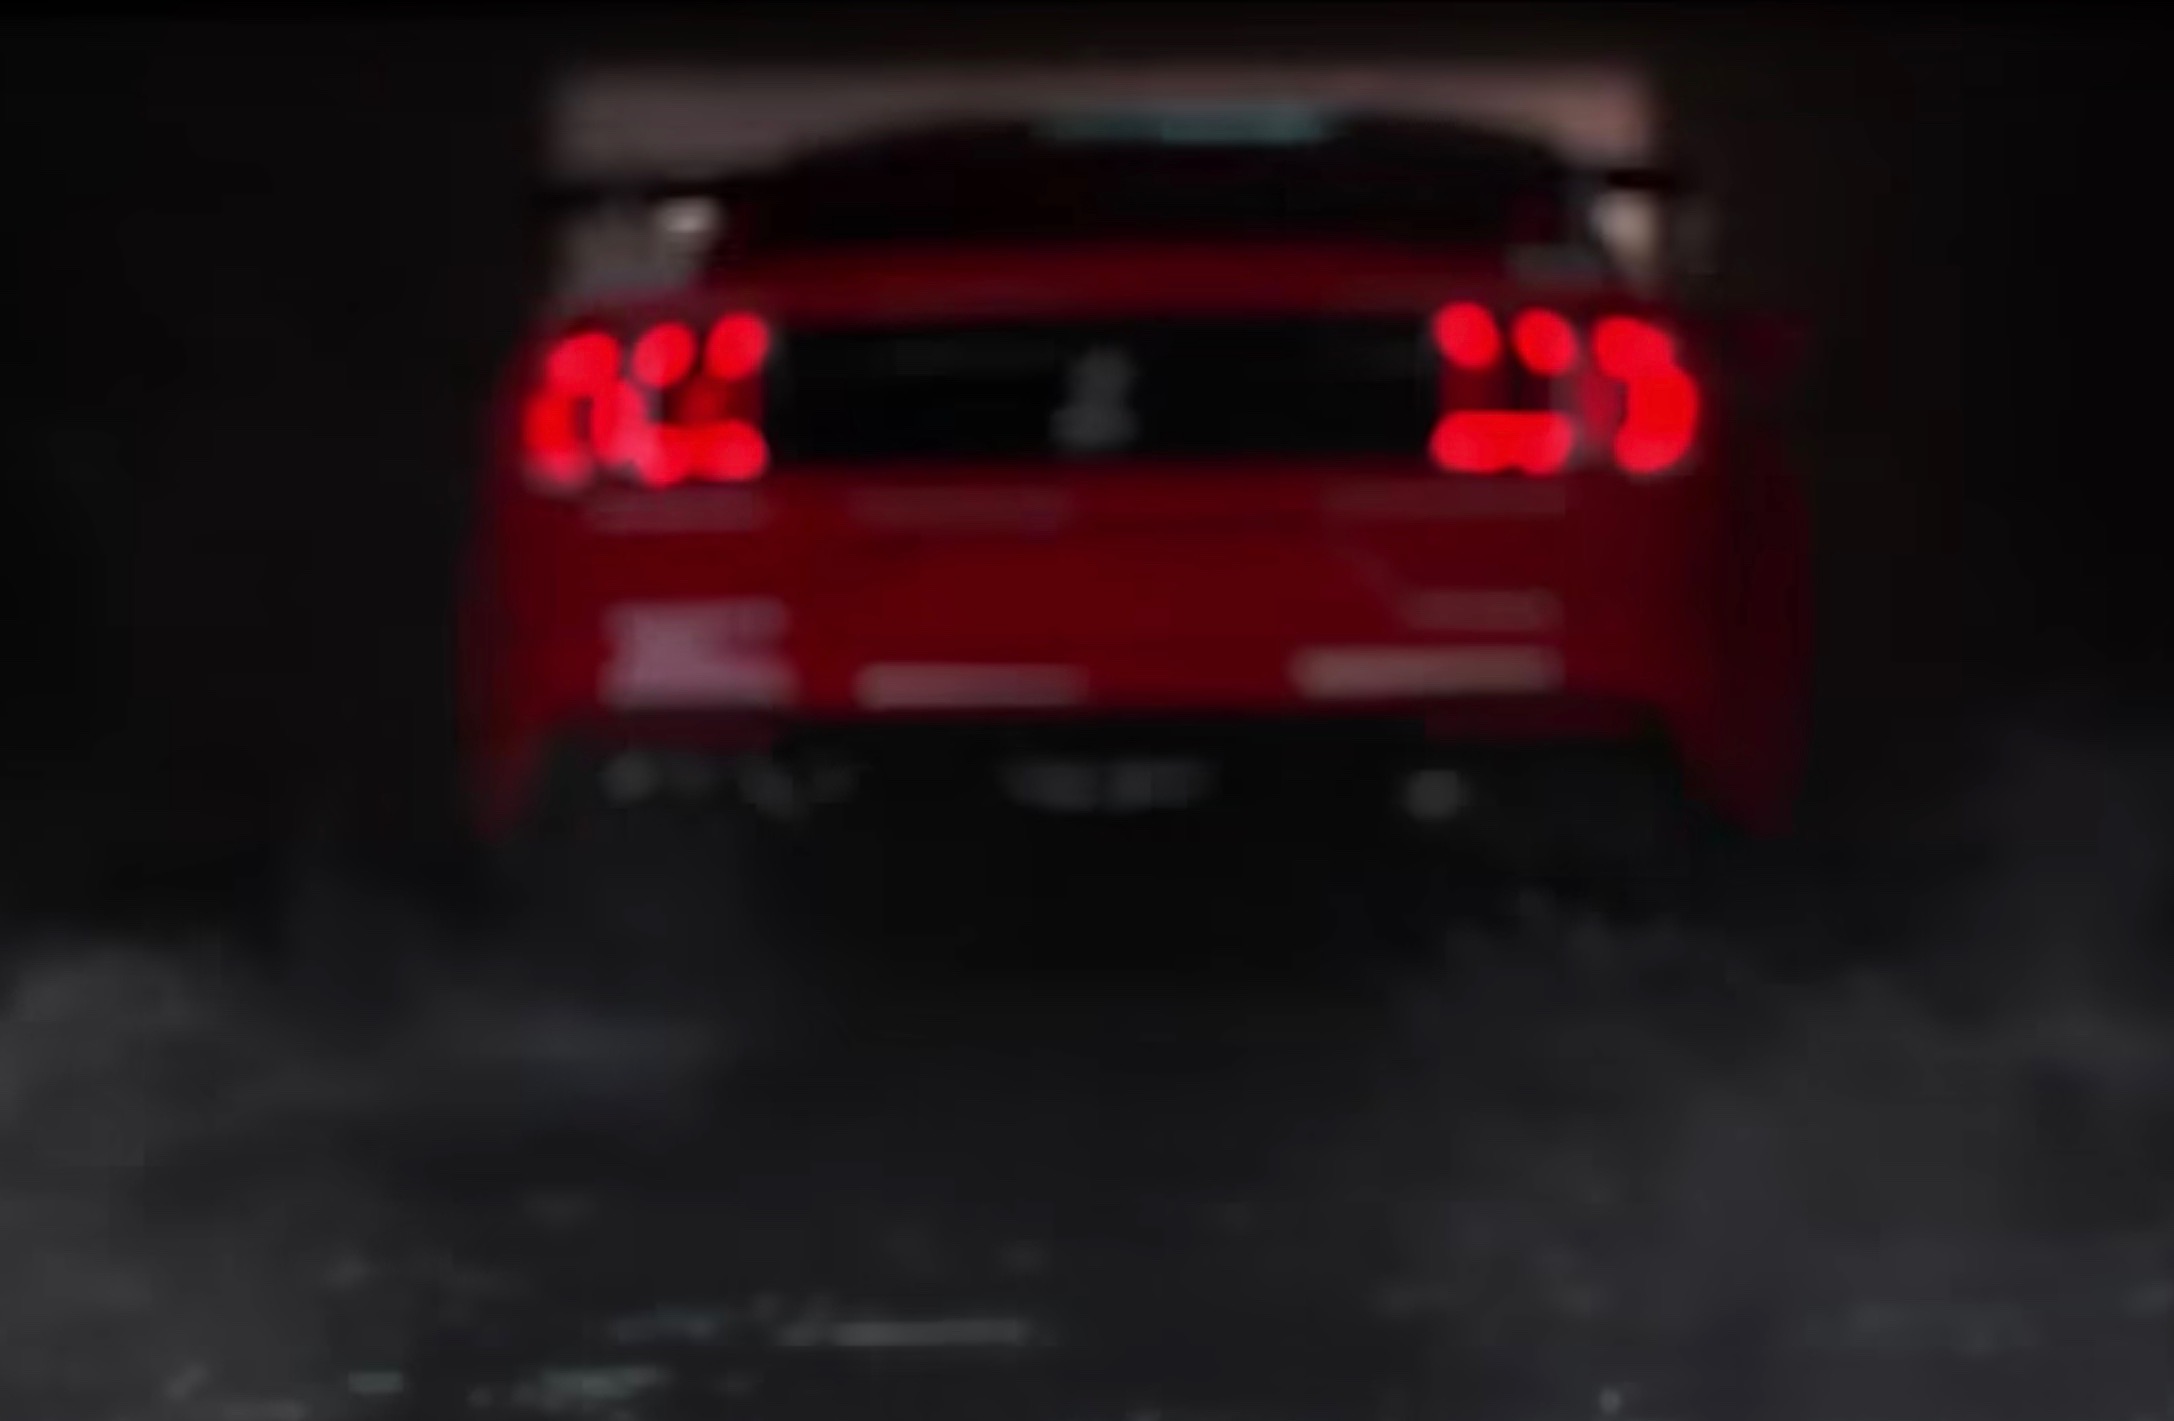 2019 Ford Mustang GT500 previewed, 700hp confirmed (video)